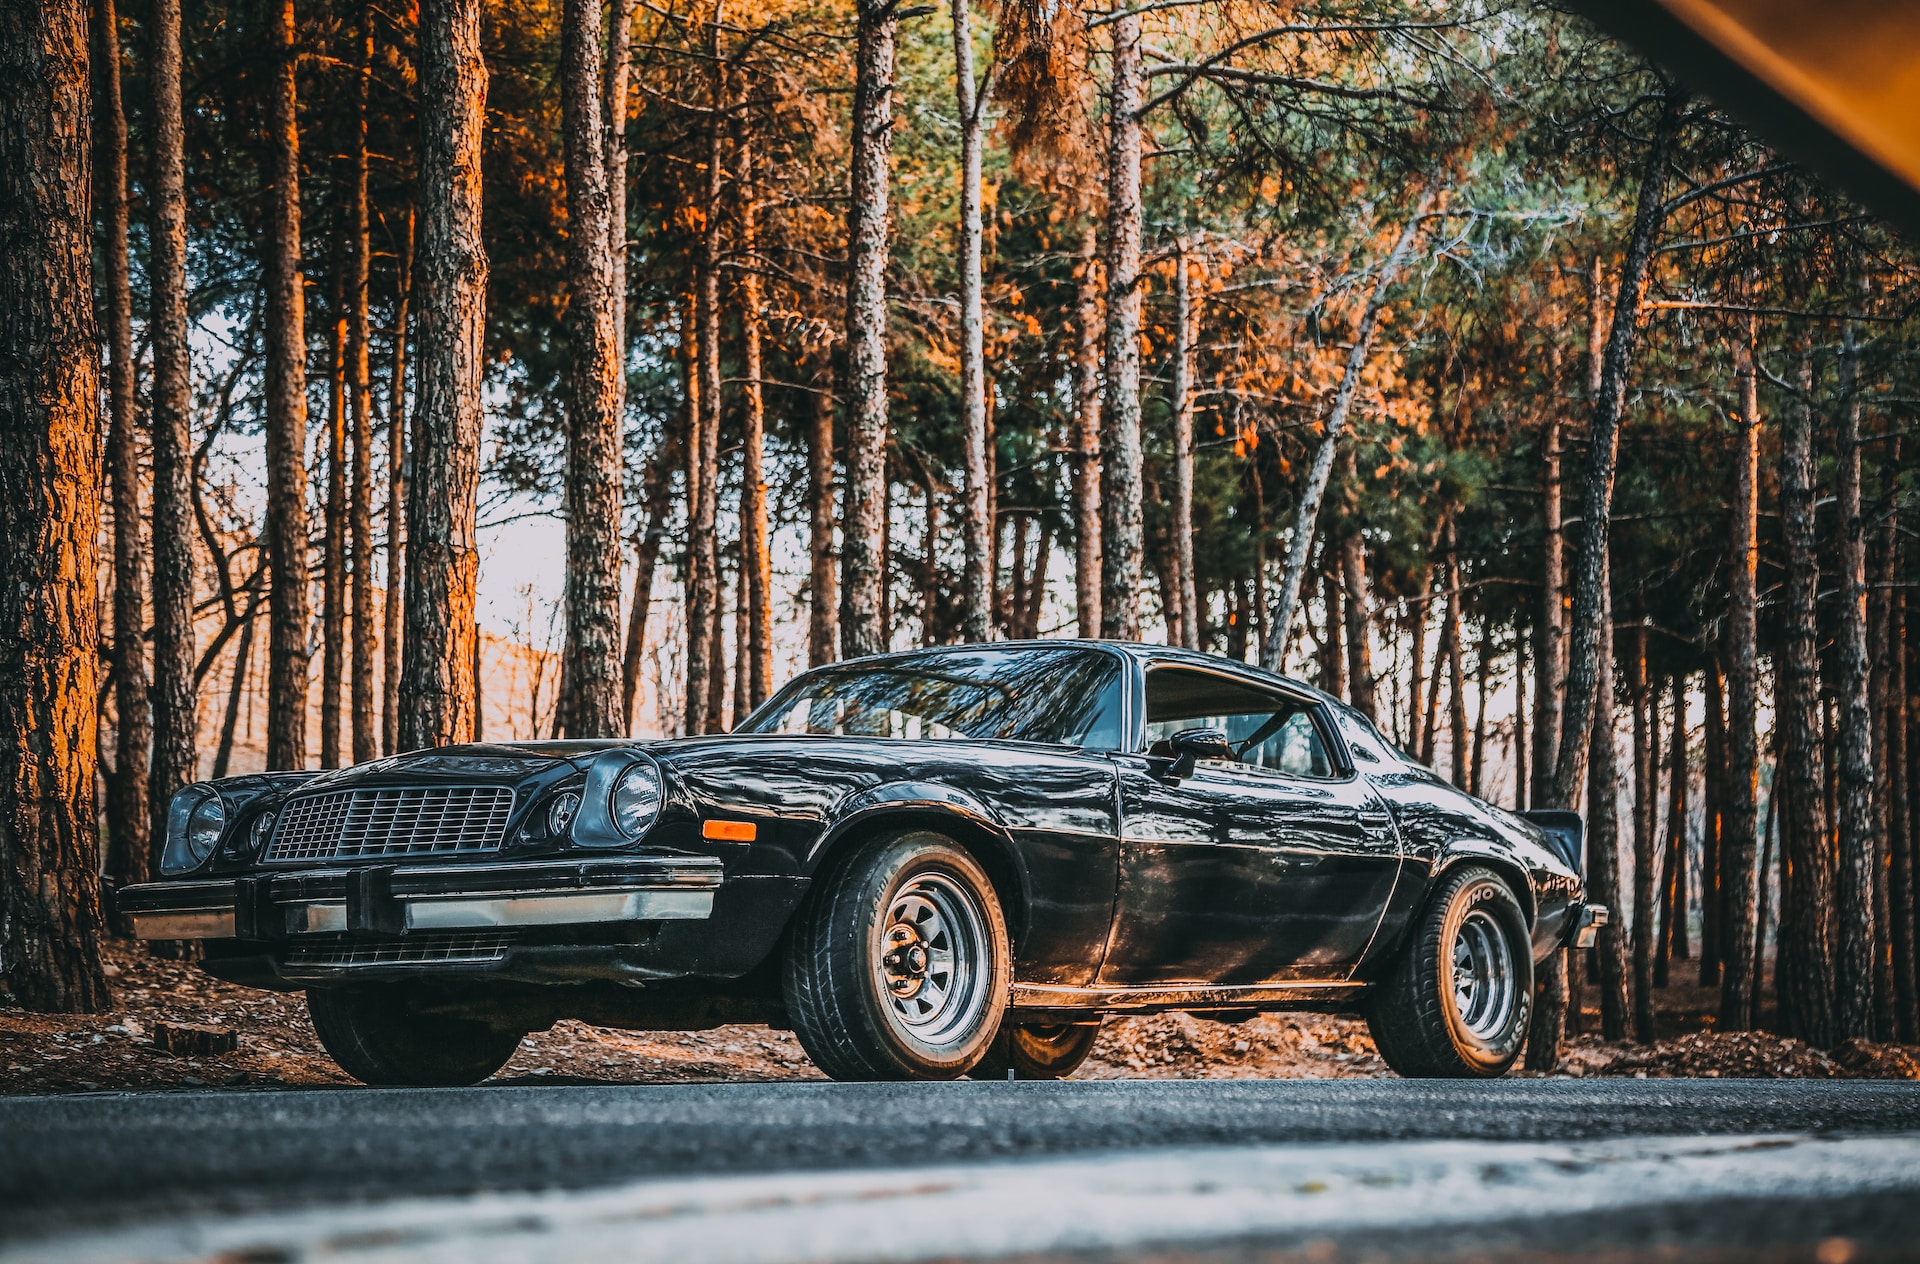 A black Camaro on a road next to trees